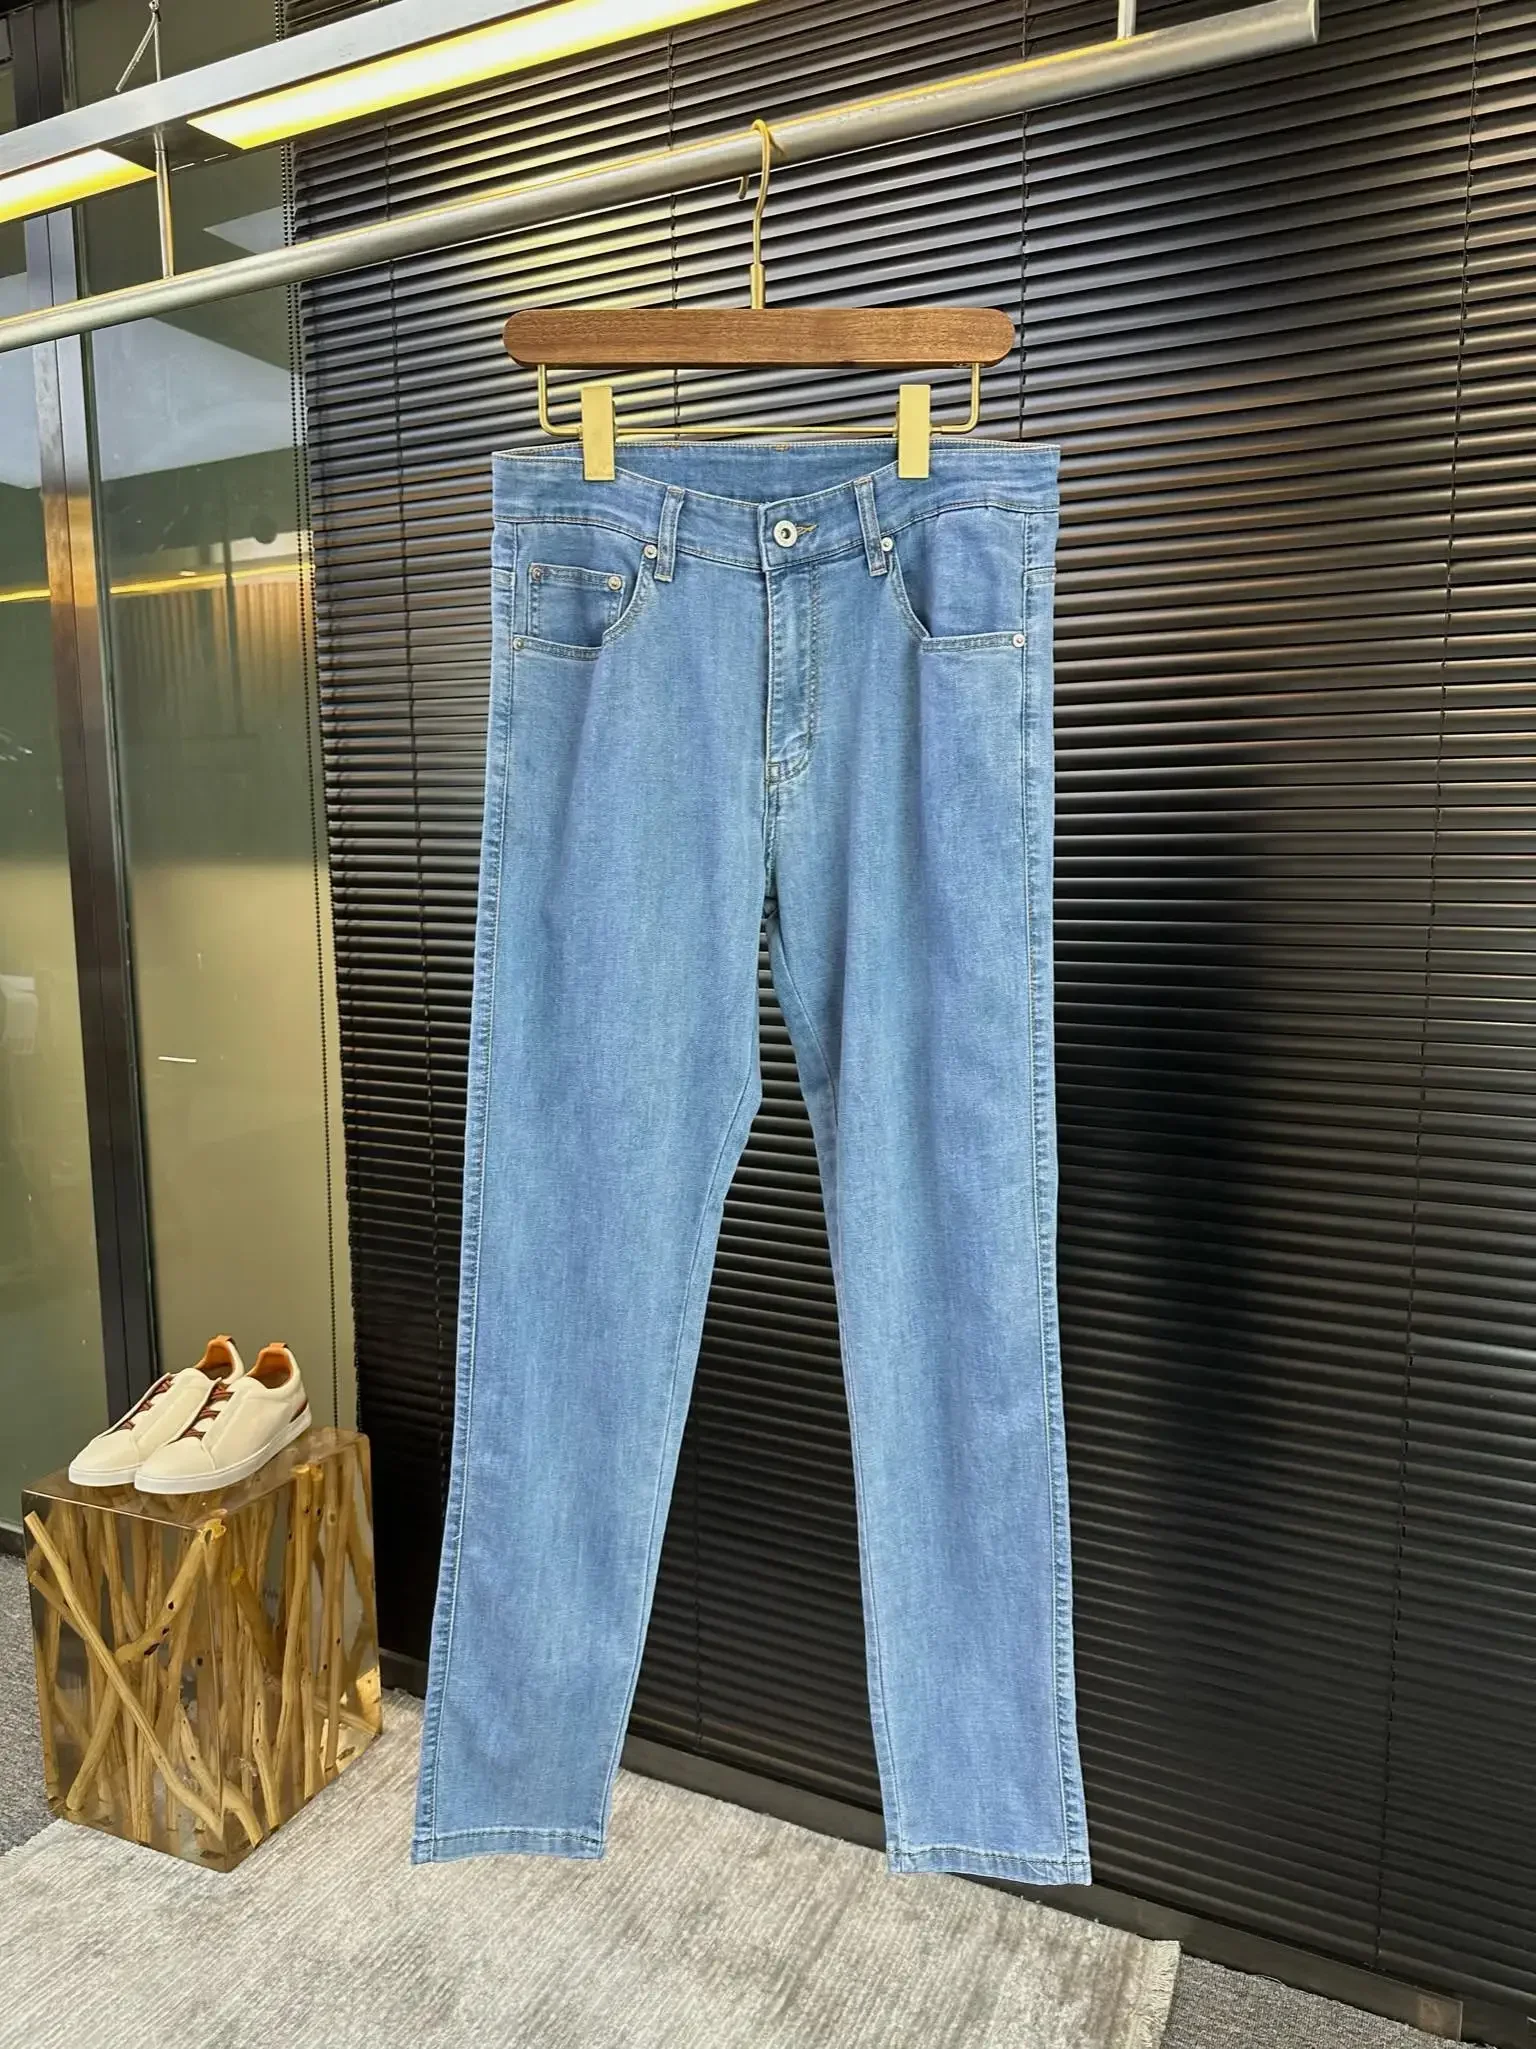 

BILLIONAIRE SIJITONGDA men's spring/summer jeans have a beautiful, refreshing, and comfortable color, with excellent upper body